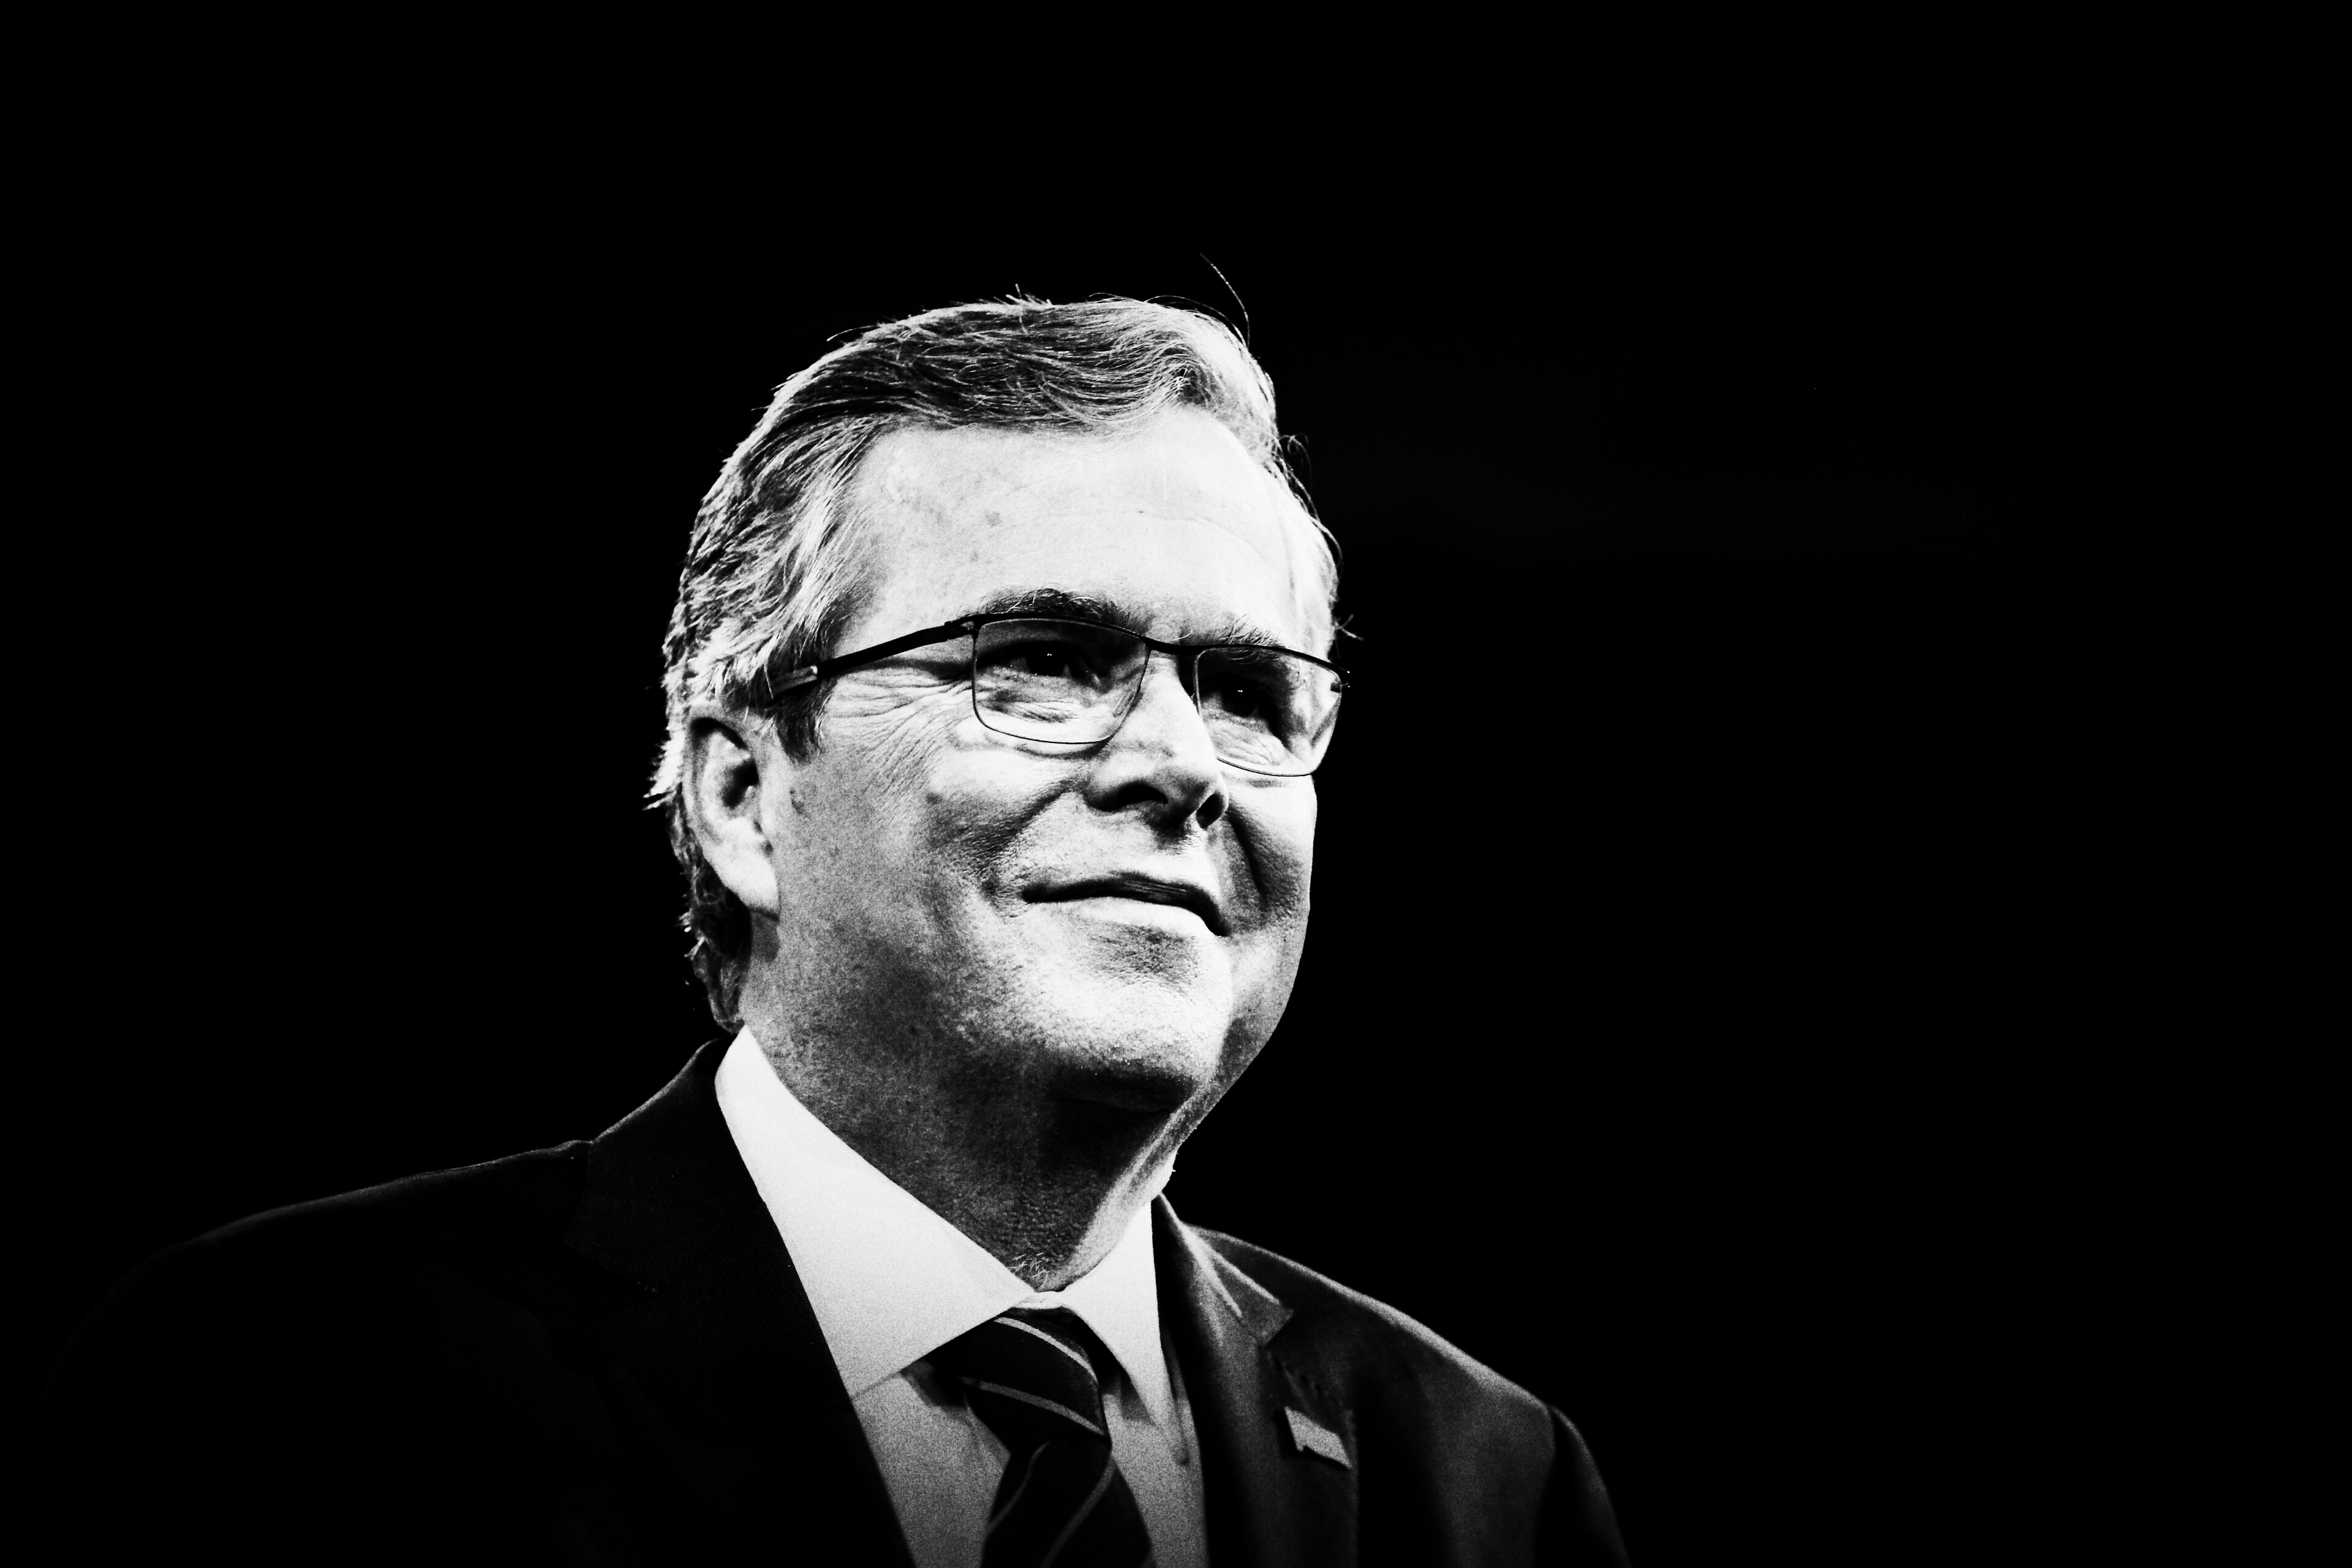 Jeb Bush speaks at the Conservative Political Action Conference (CPAC) in National Harbor, Md. on Feb. 27, 2015. (Mark Peterson—Redux for TIME)